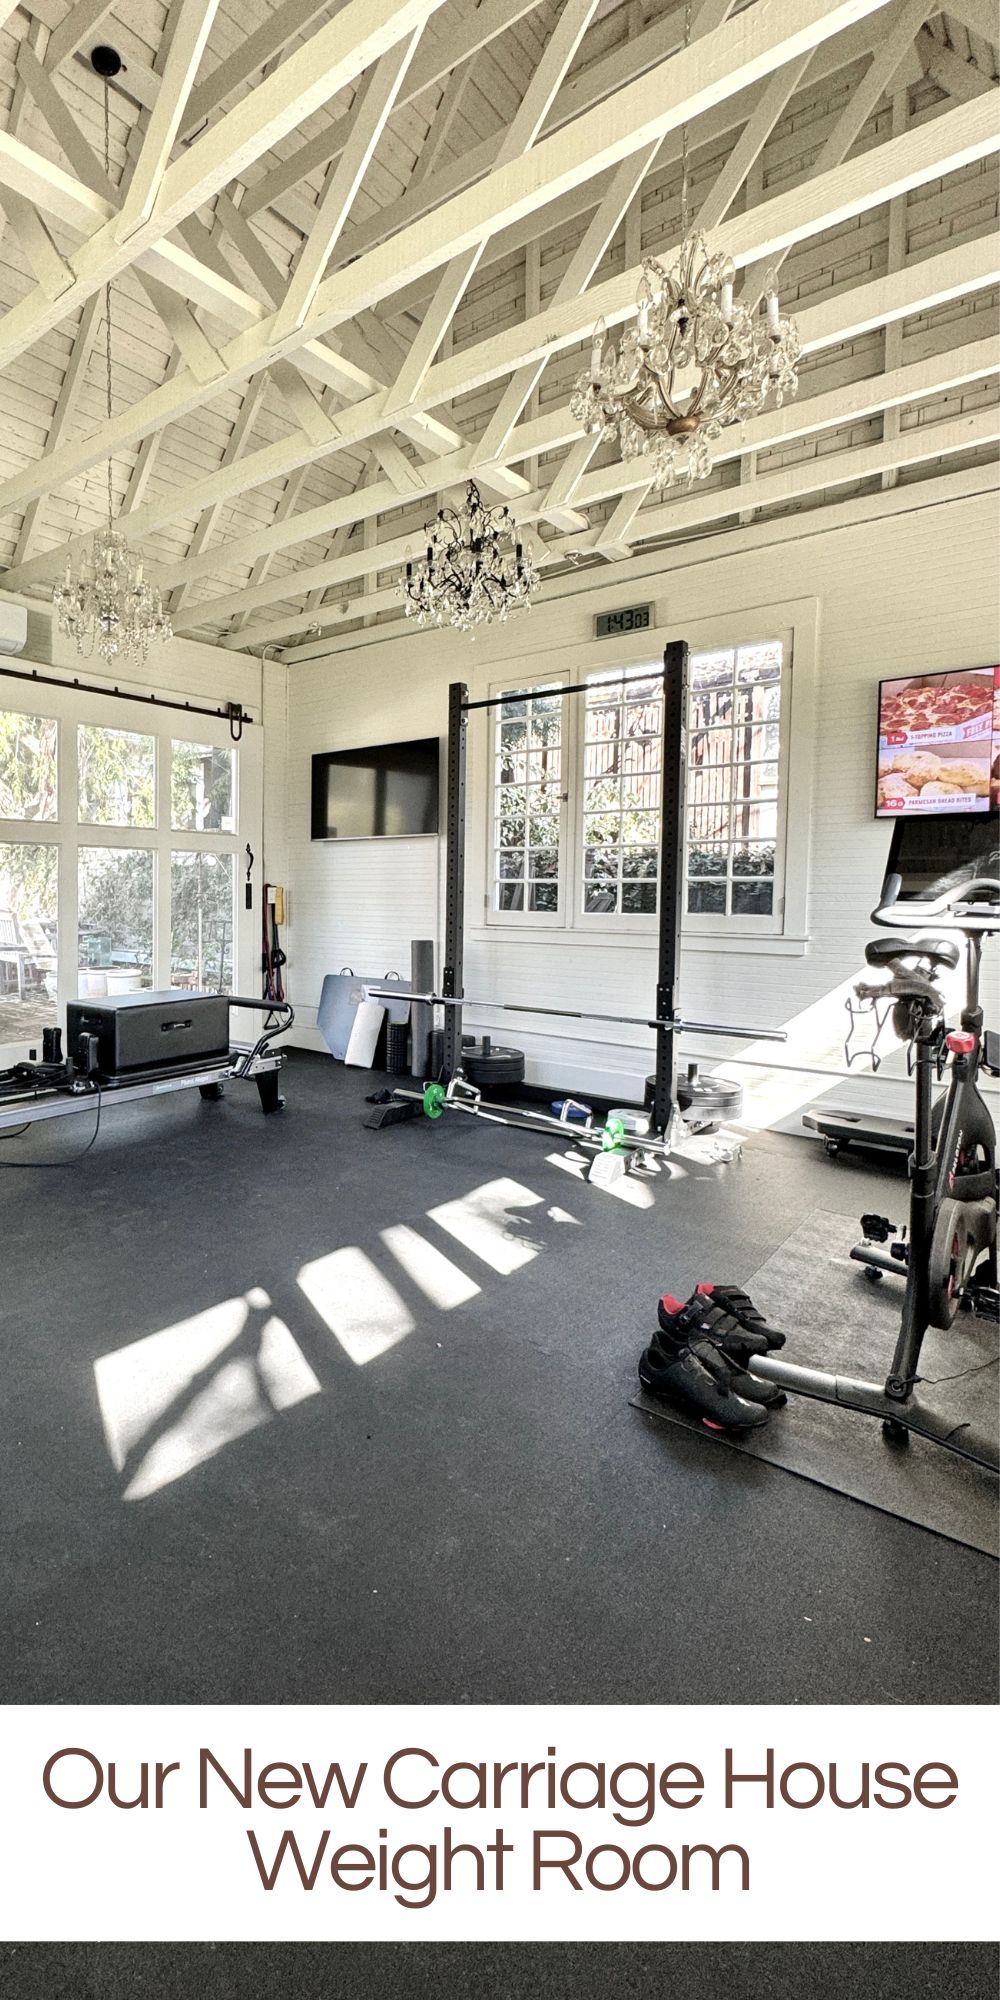 For the last three weeks, we have been very busy converting the Carriage House in the back of our yard into a weight room. We now have a spacious home gym!